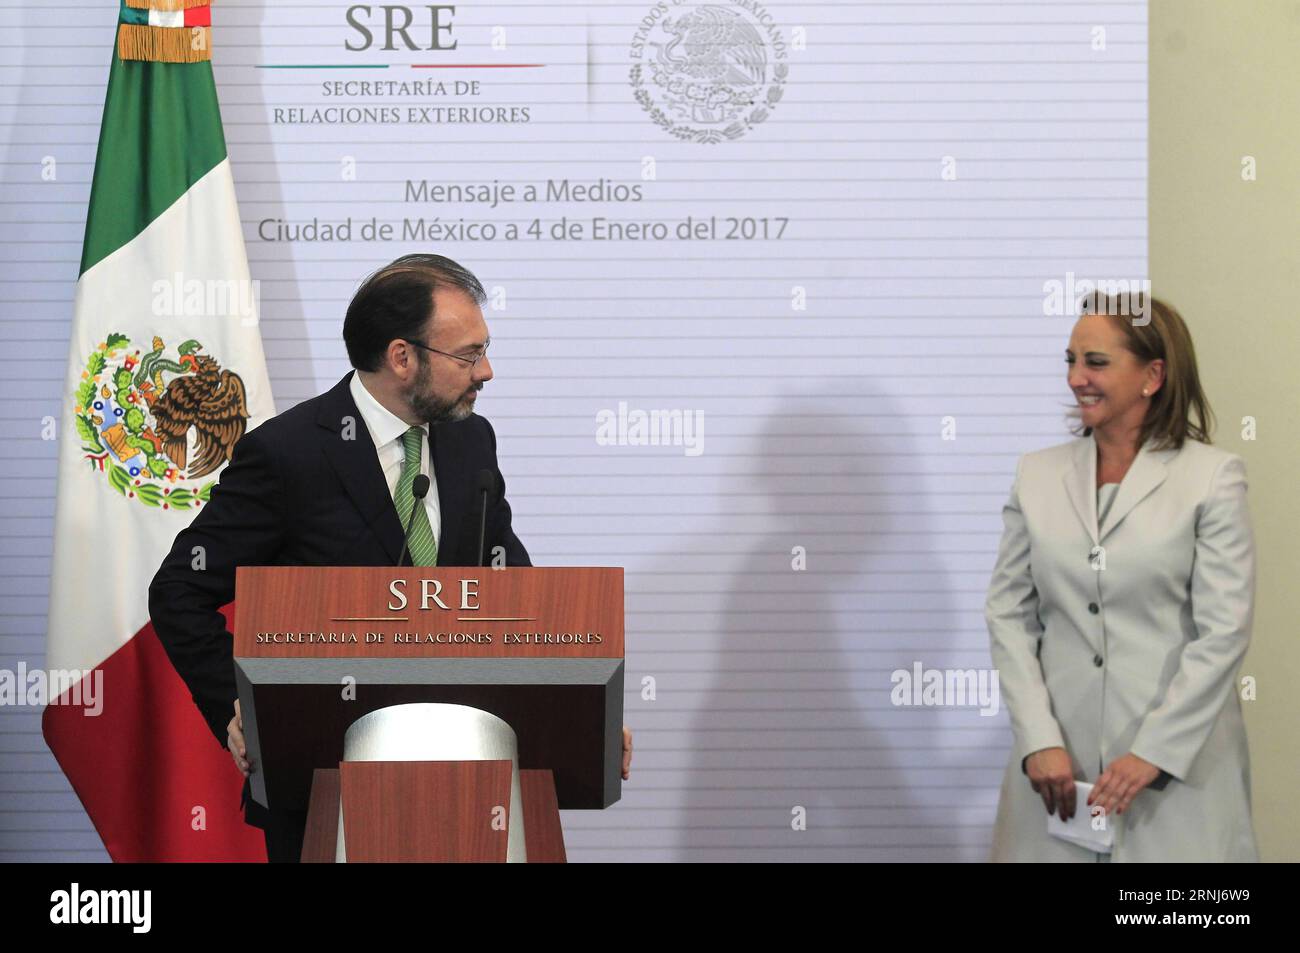 (170105) -- MEXICO CITY, Jan. 4, 2017 -- Mexico s new Foreign Minister Luis Videgaray (L) and his predecessor Claudia Ruiz Massieu attend a press conference in Mexico City, capital of Mexico, on Jan. 4, 2017. Mexican President Enrique Pena Nieto on Wednesday named former Economy Minister Luis Videgaray Caso as his new foreign minister, replacing Claudia Ruiz Massieu. ) (zcc) MEXICO-MEXICO CITY-NEW FOREIGN MINISTER STR PUBLICATIONxNOTxINxCHN   Mexico City Jan 4 2017 Mexico S New Foreign Ministers Luis Videgaray l and His predecessor Claudia Ruiz MASSIEU attend a Press Conference in Mexico City Stock Photo